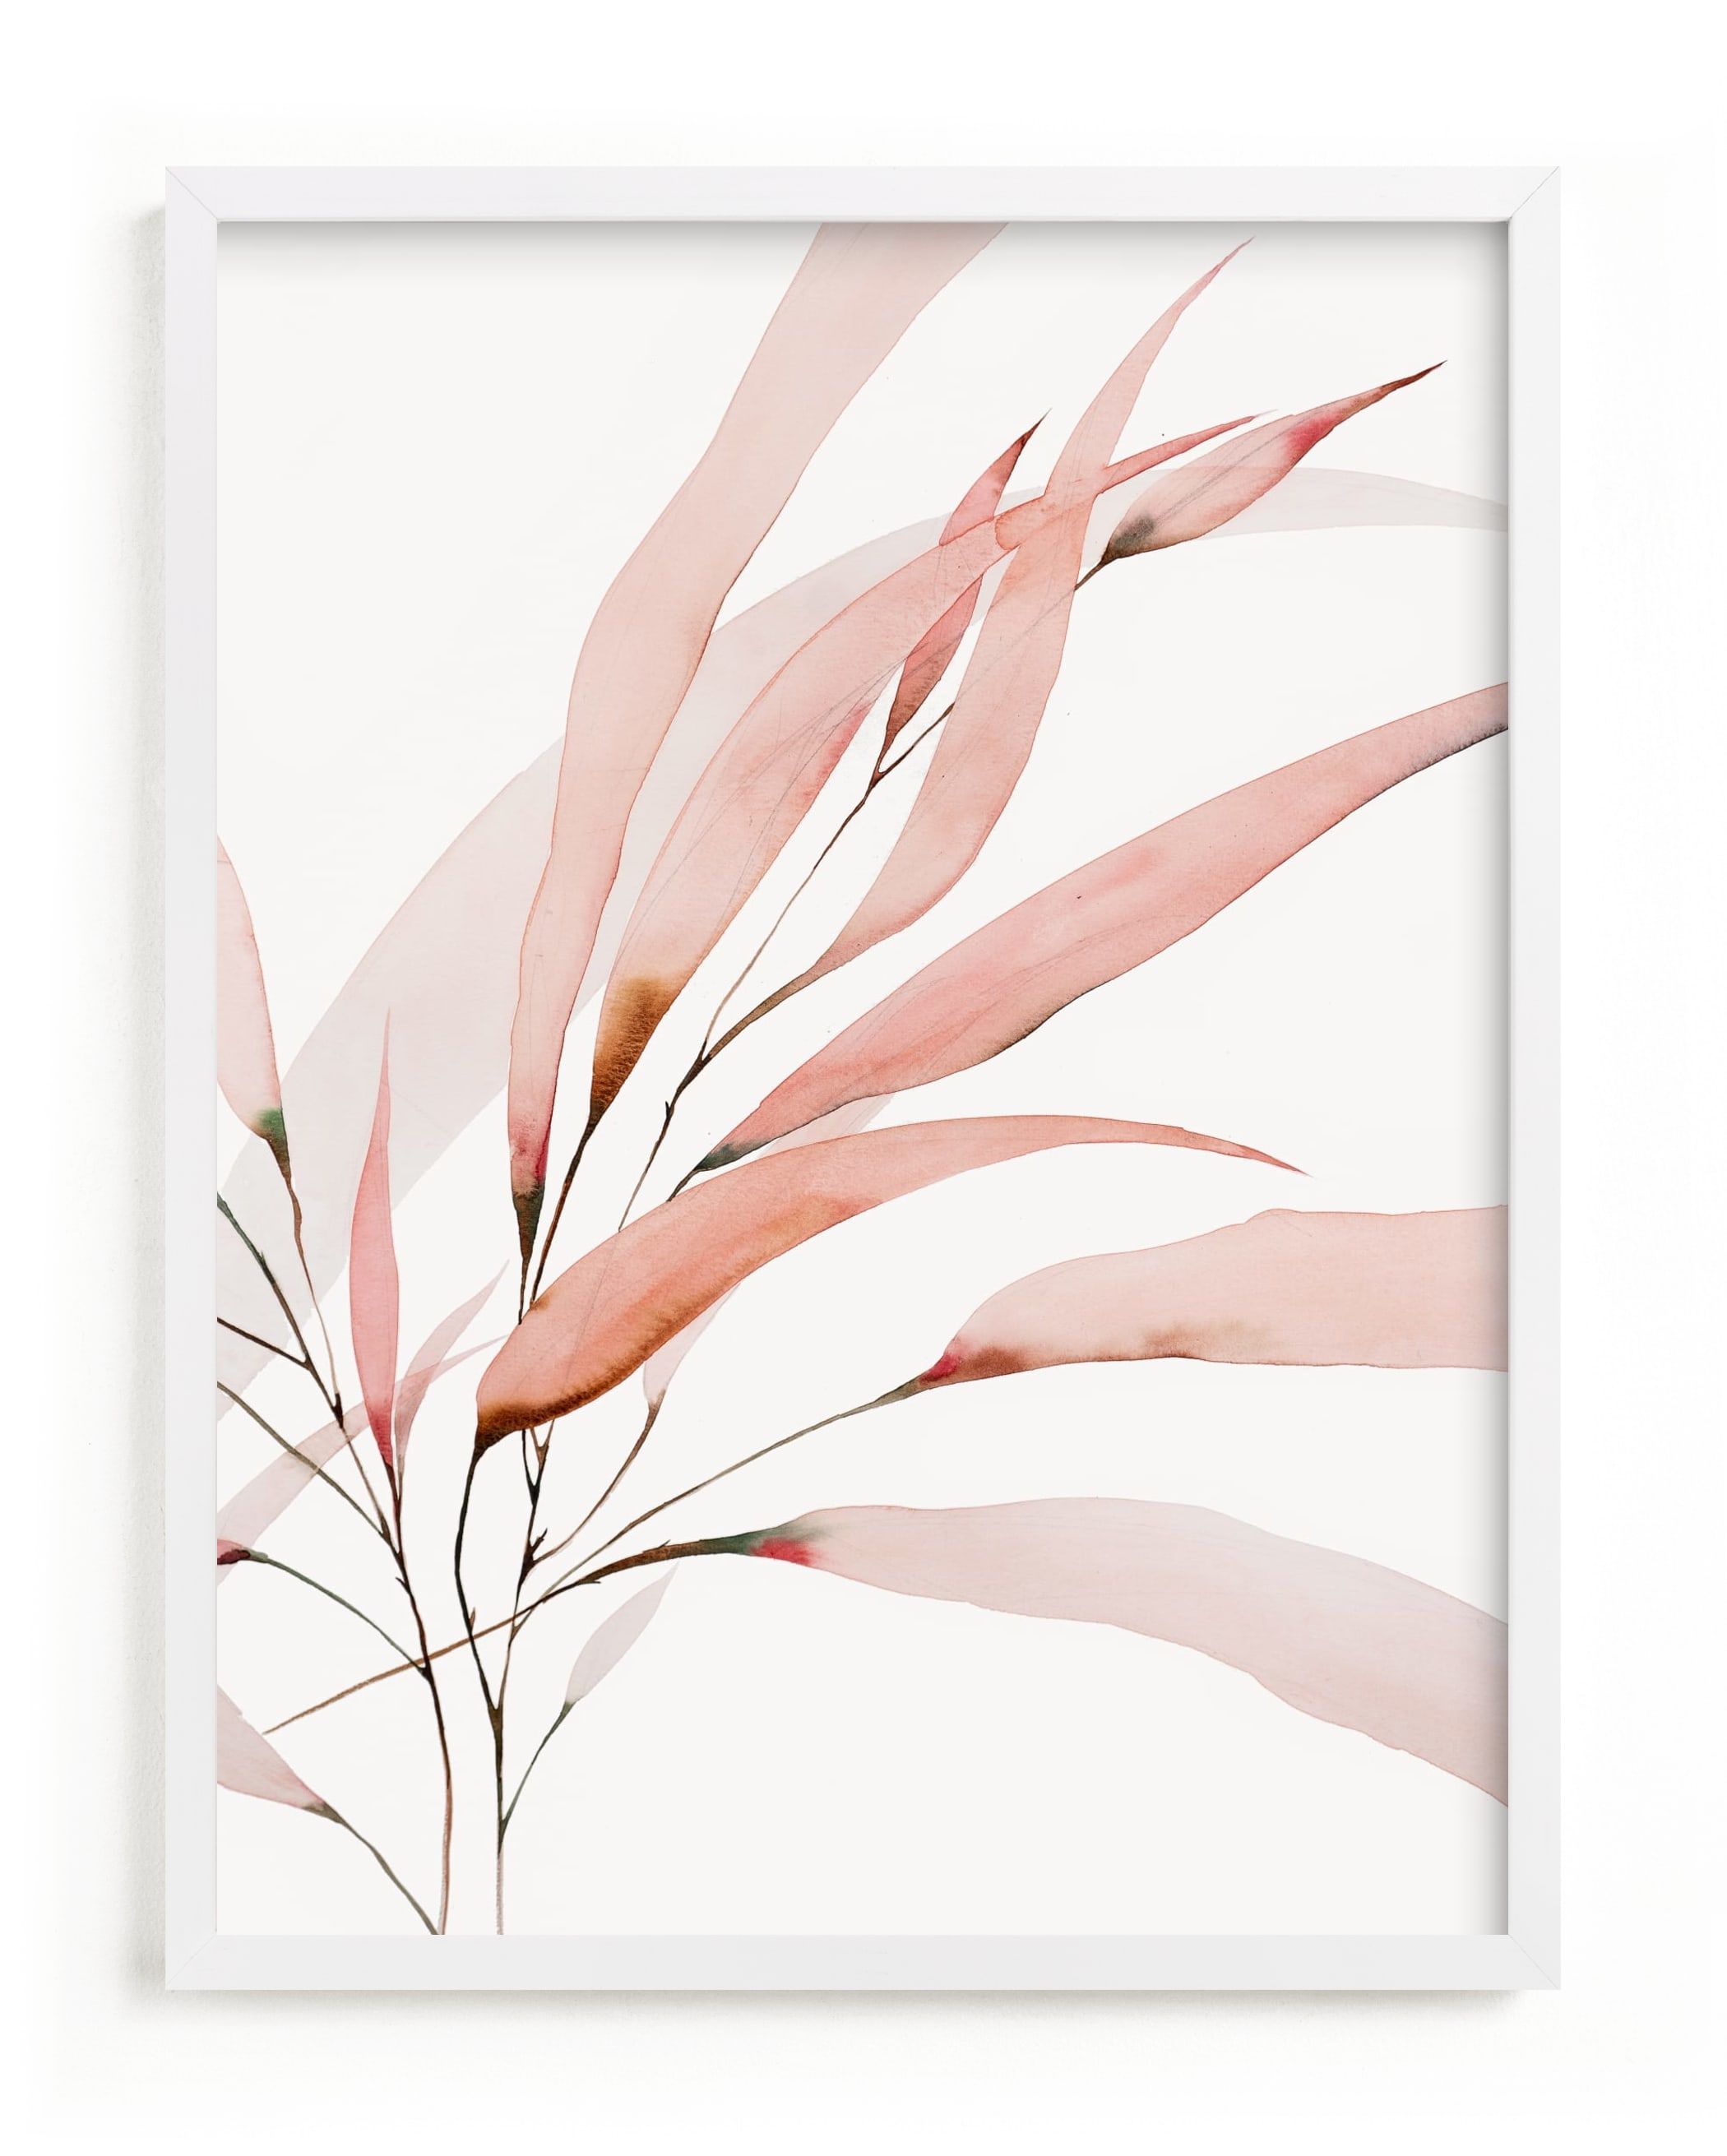 "Mogna02" - Painting Limited Edition Art Print by jinseikou. | Minted